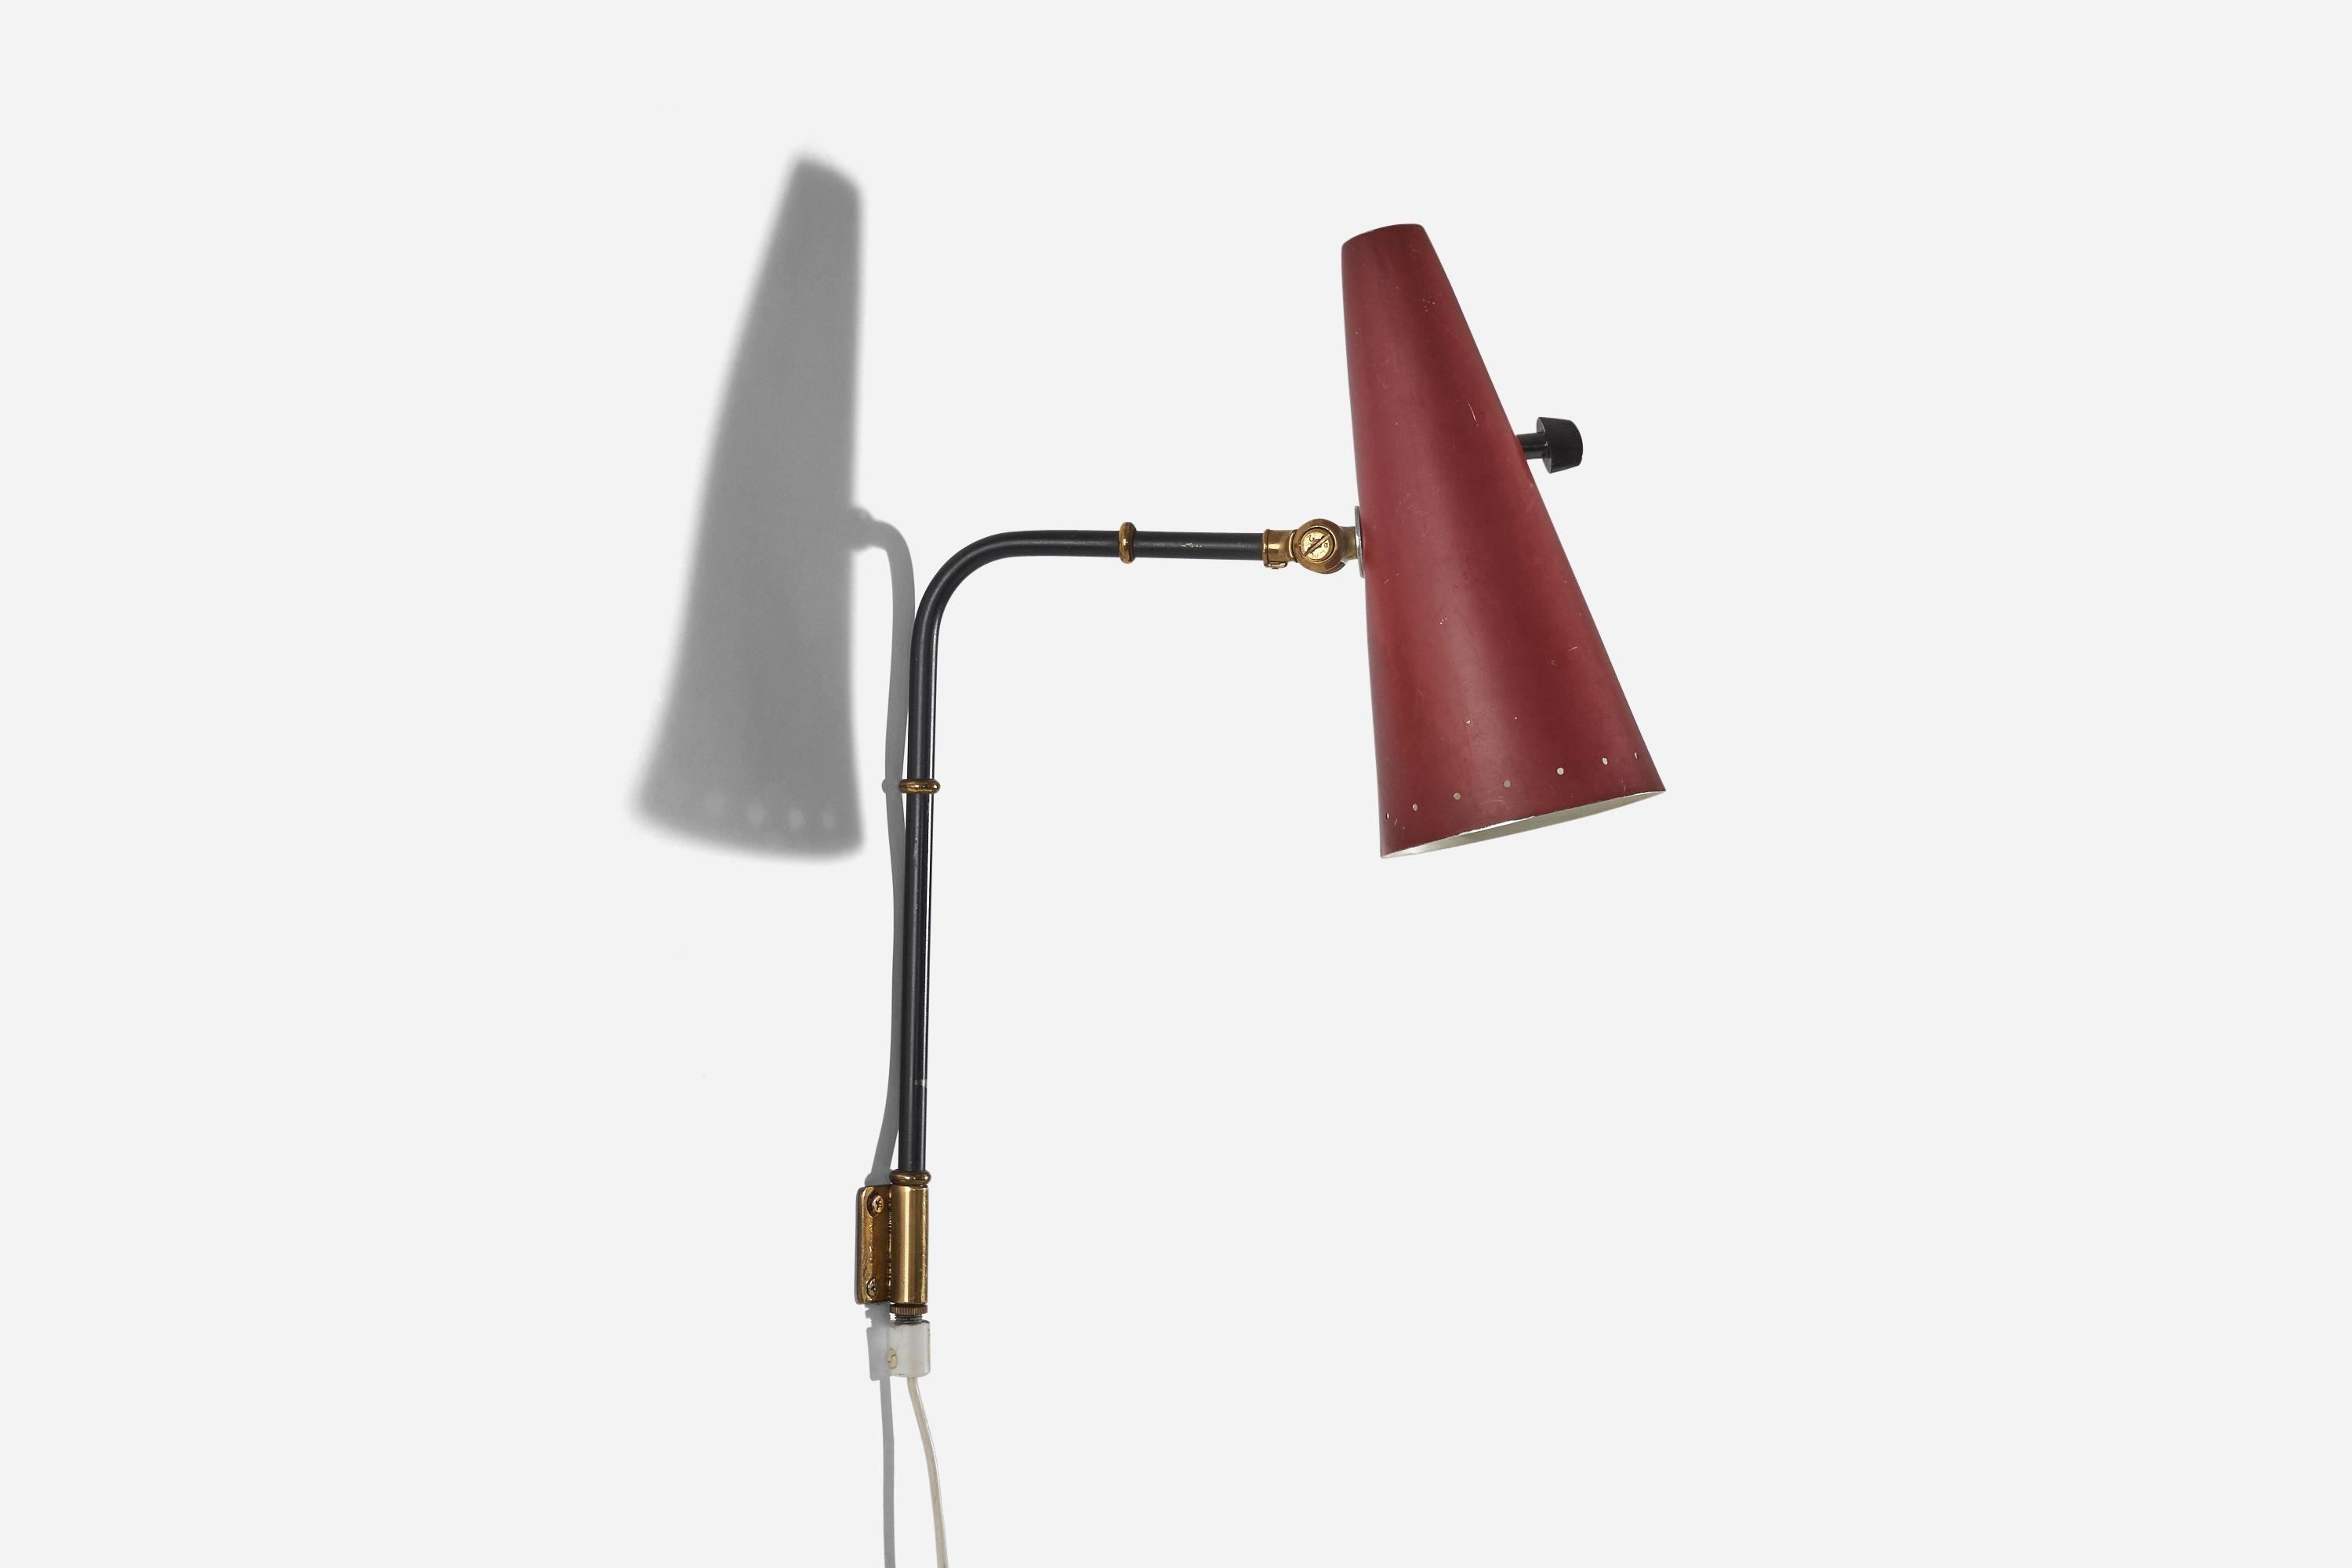 A brass and red metal wall light designed and produced in Sweden, c. 1950s.

Dimensions of back plate (inches) : 1.625 x 1.625 x 0.0625 (H x W x D).